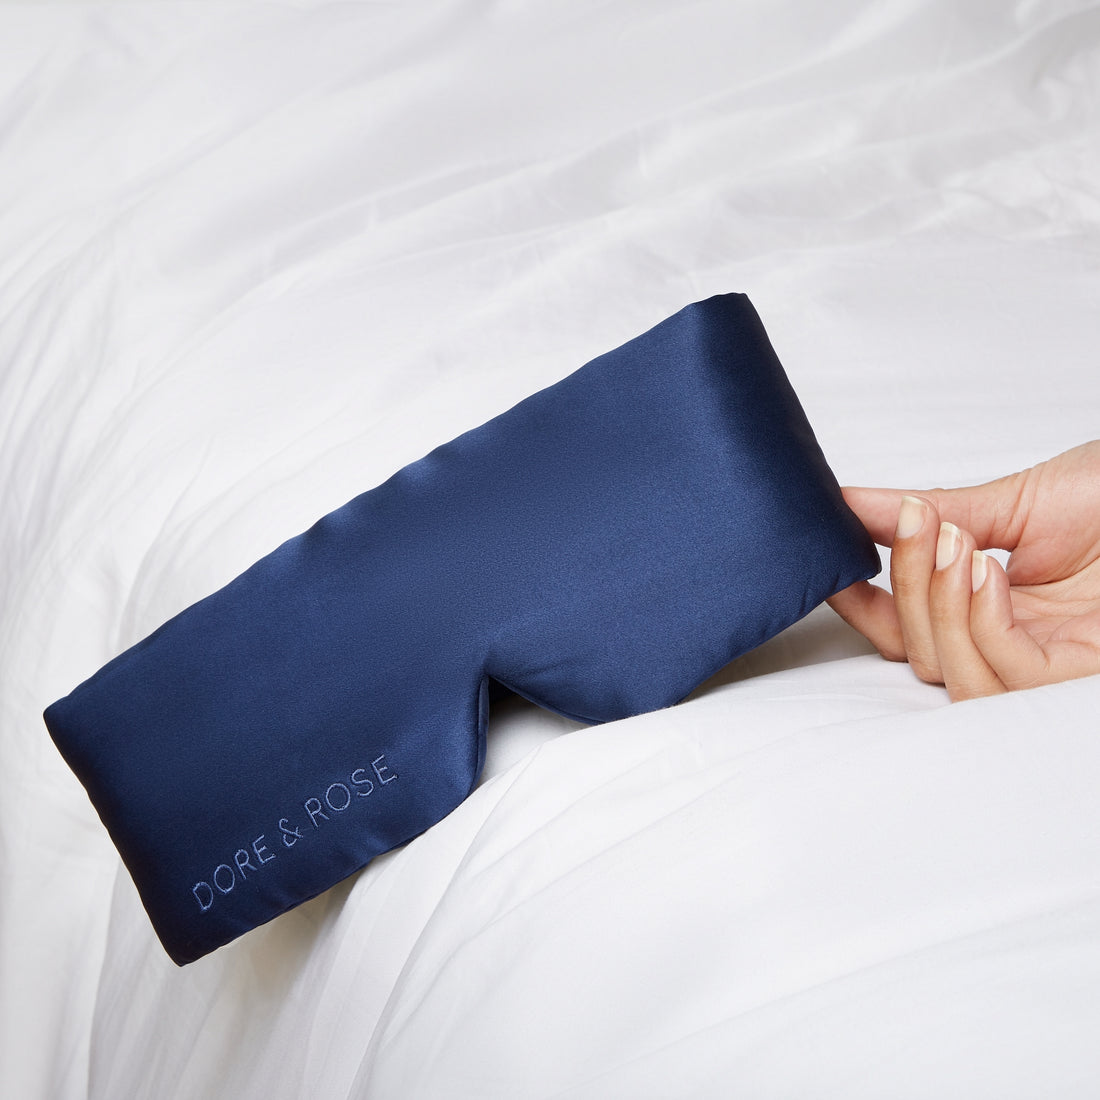 Woman's hand holding a Silk Sleeping Eyemask from Dore and Rose in the color Navy Blue